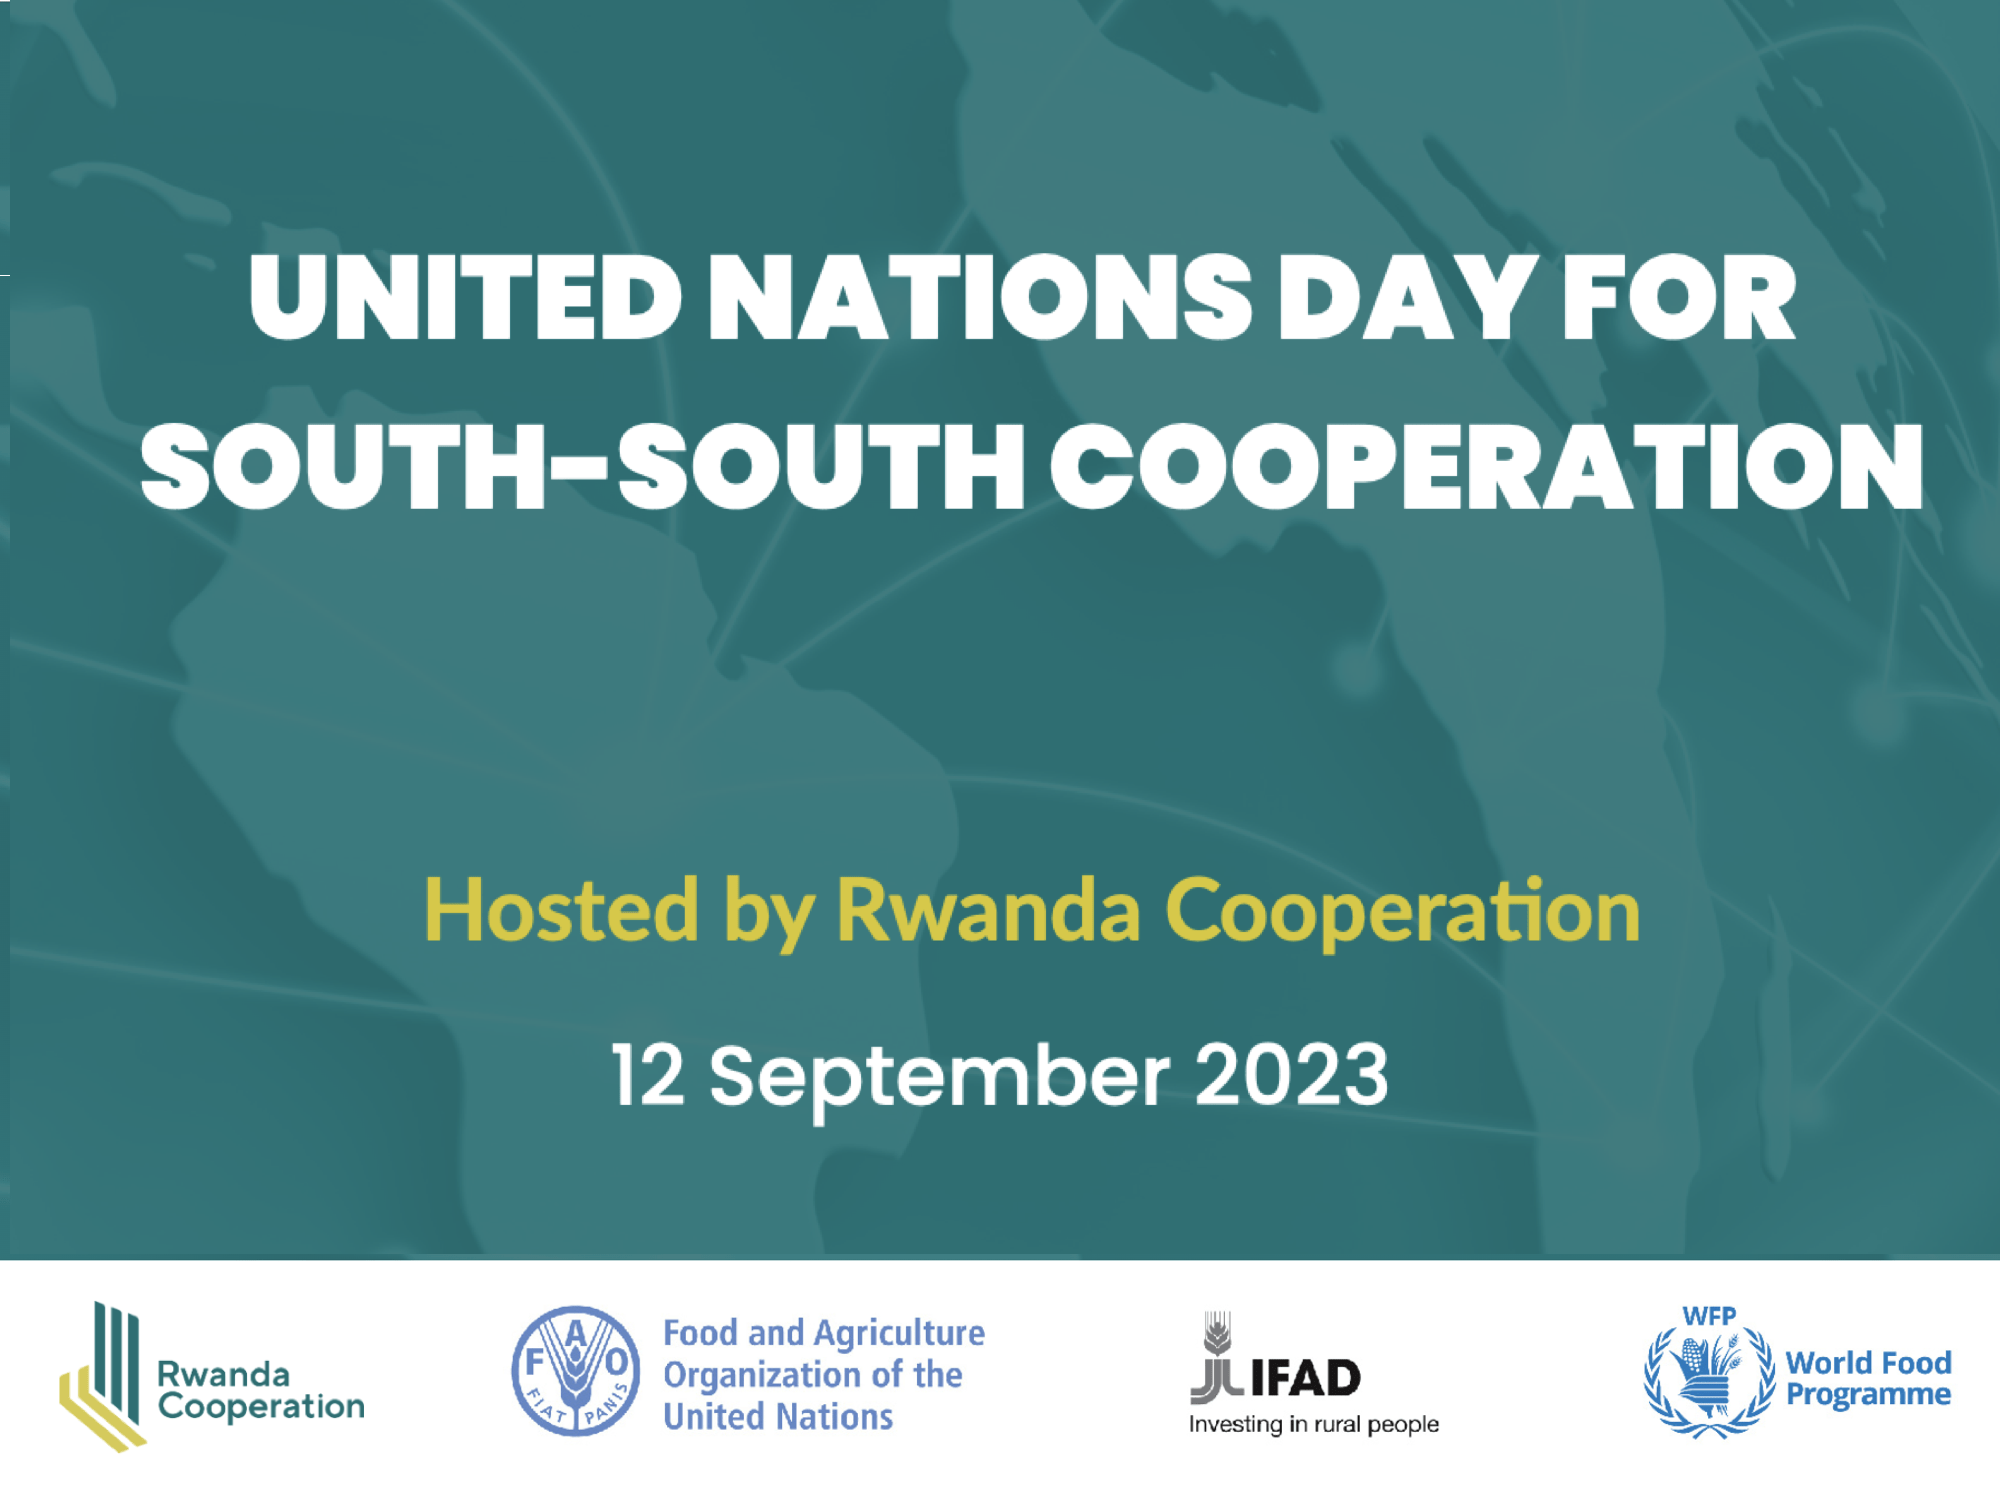 Rome-Based Agencies Celebration of UN Day for South-South Cooperation, 12 September 2023